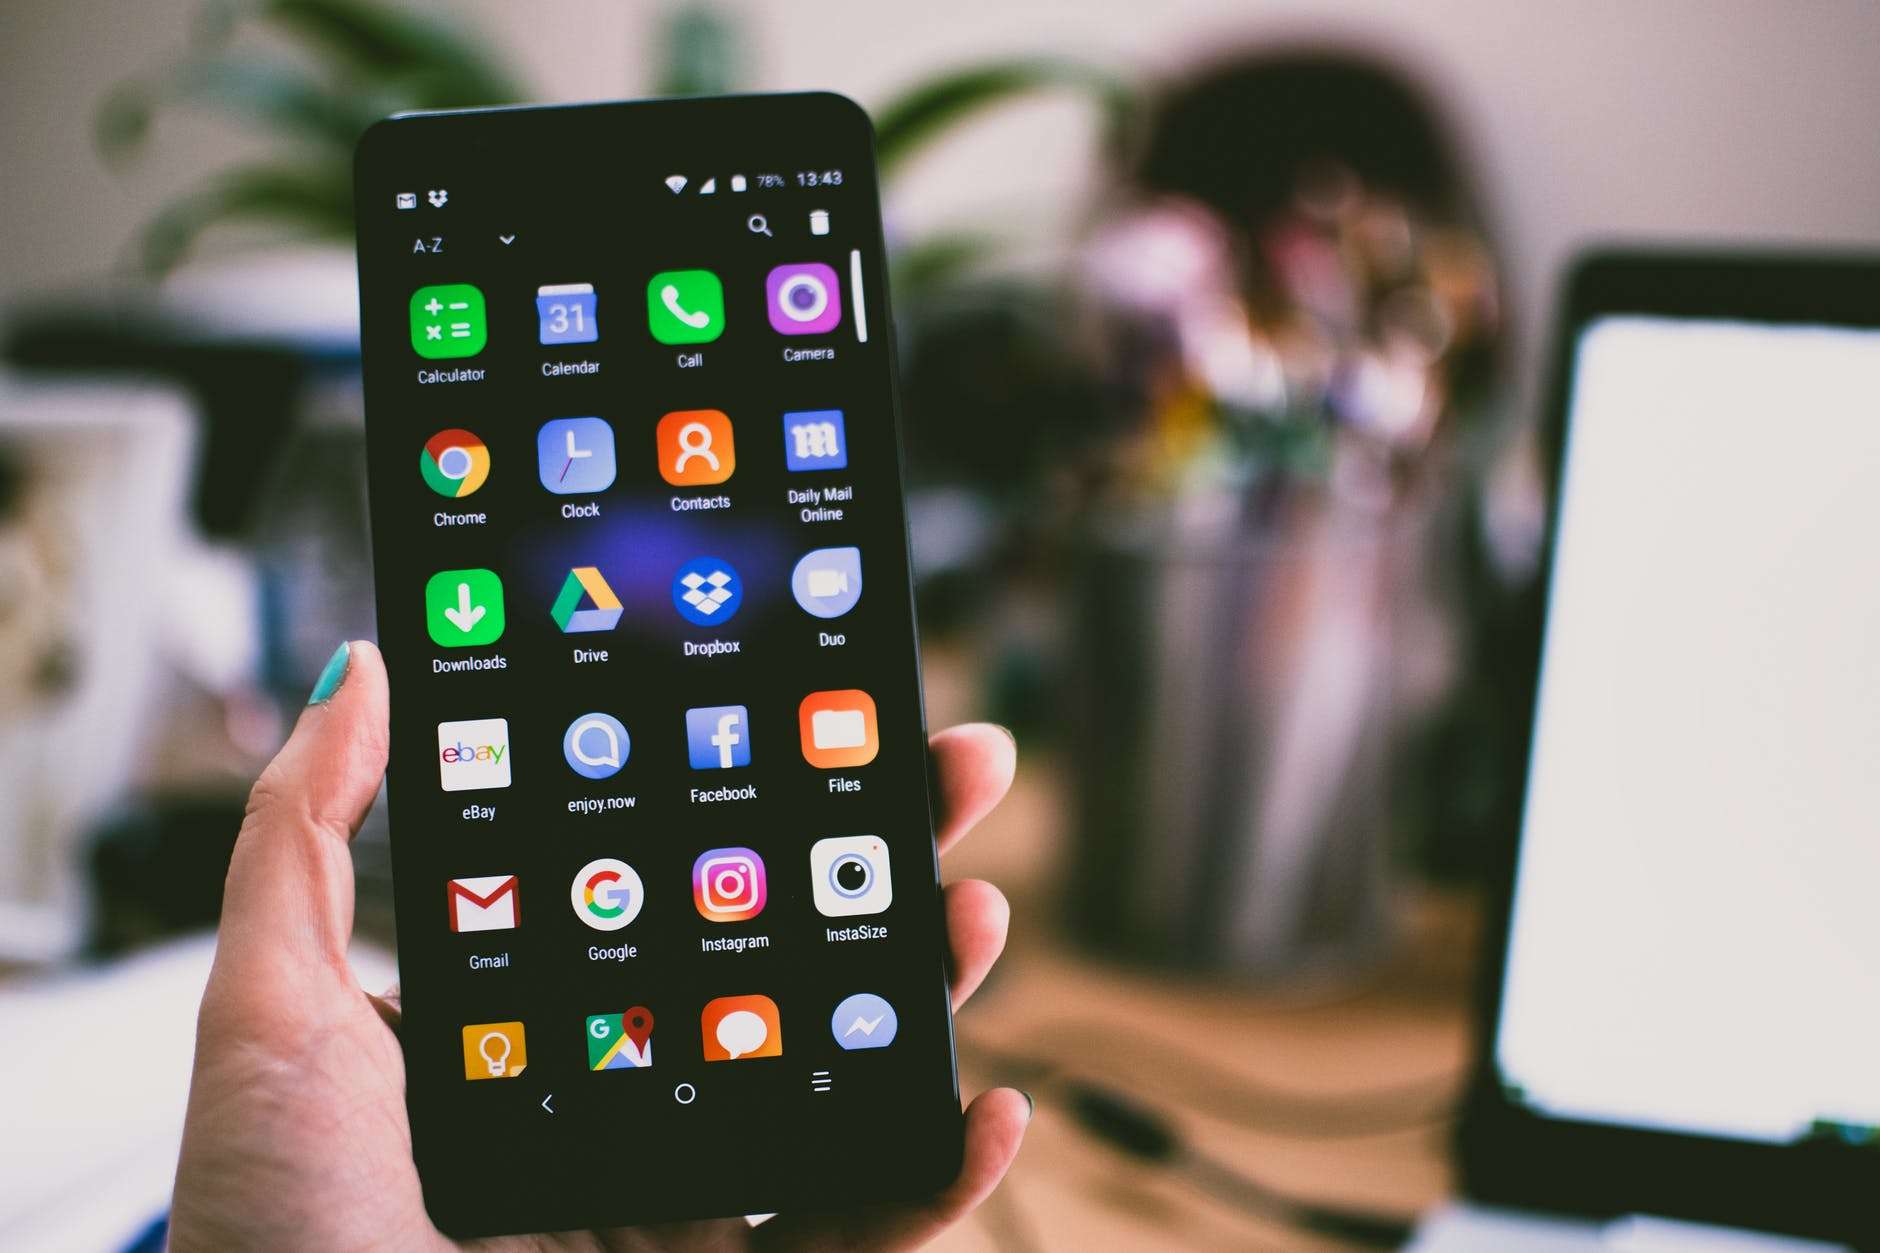 Dangerous app for students: Android apps 8 times more 'dangerous' than iOS  apps for students, claims study